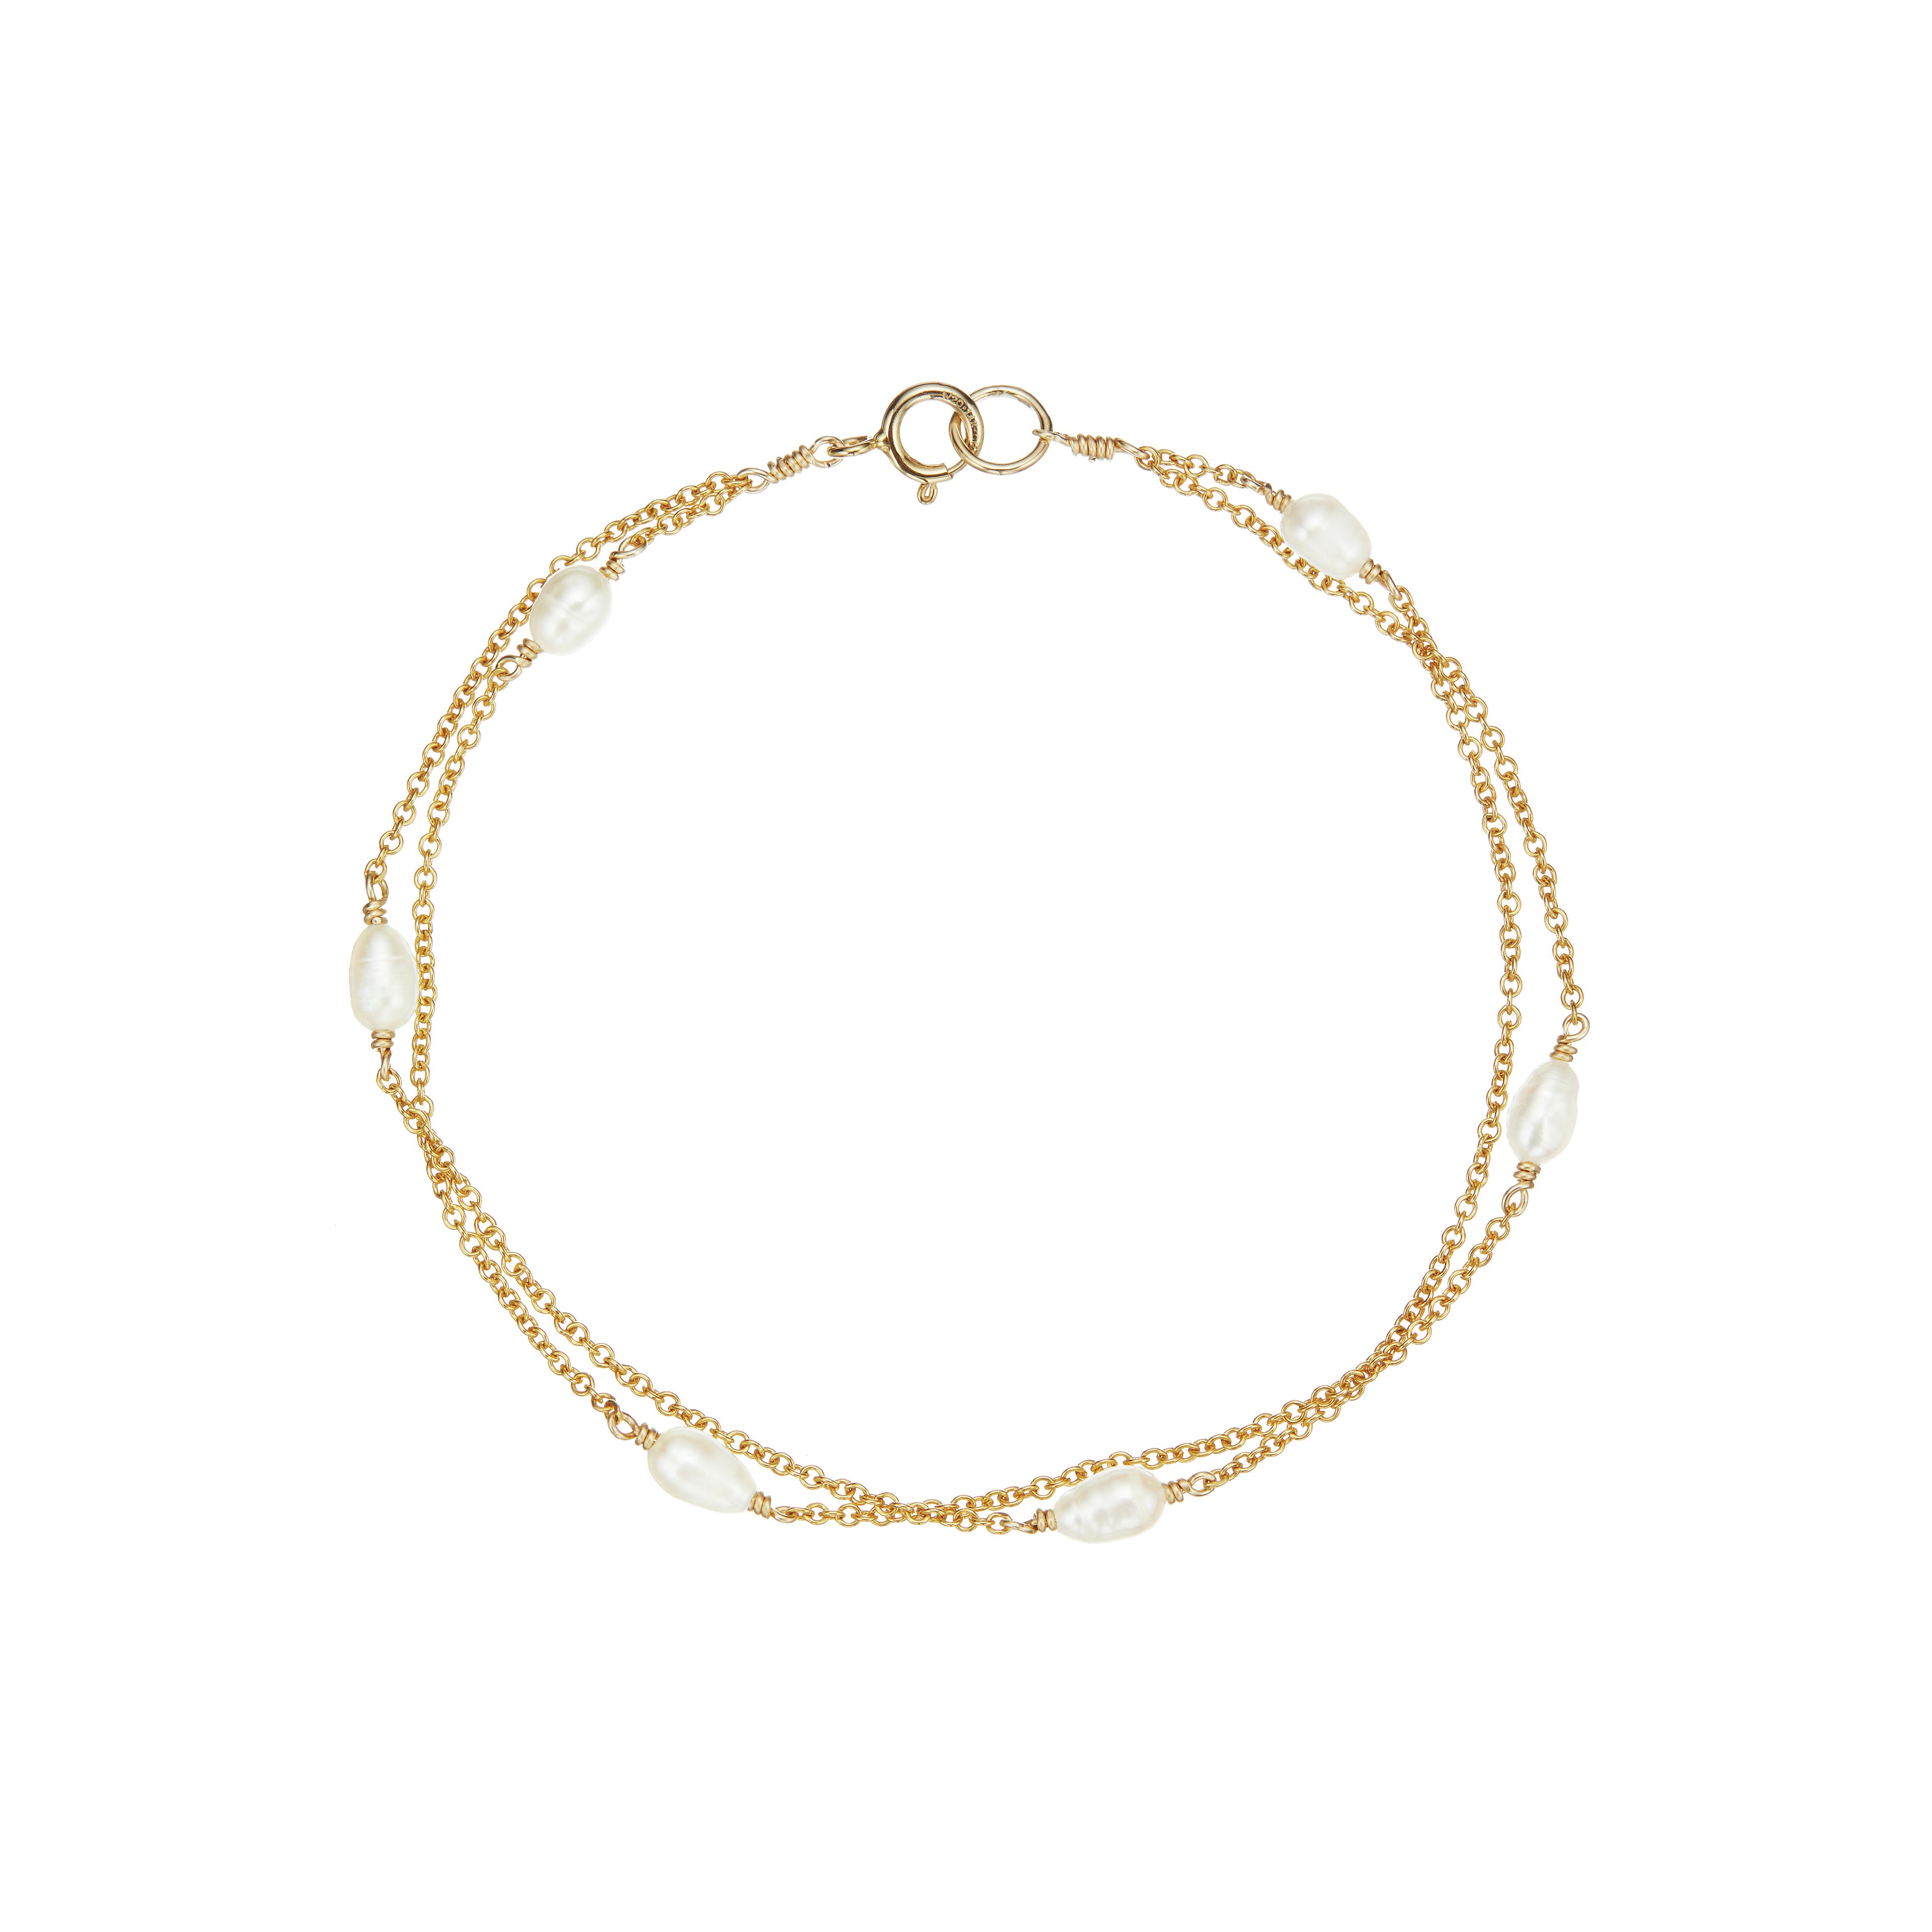 Gold layered seed pearl bracelet on a white background